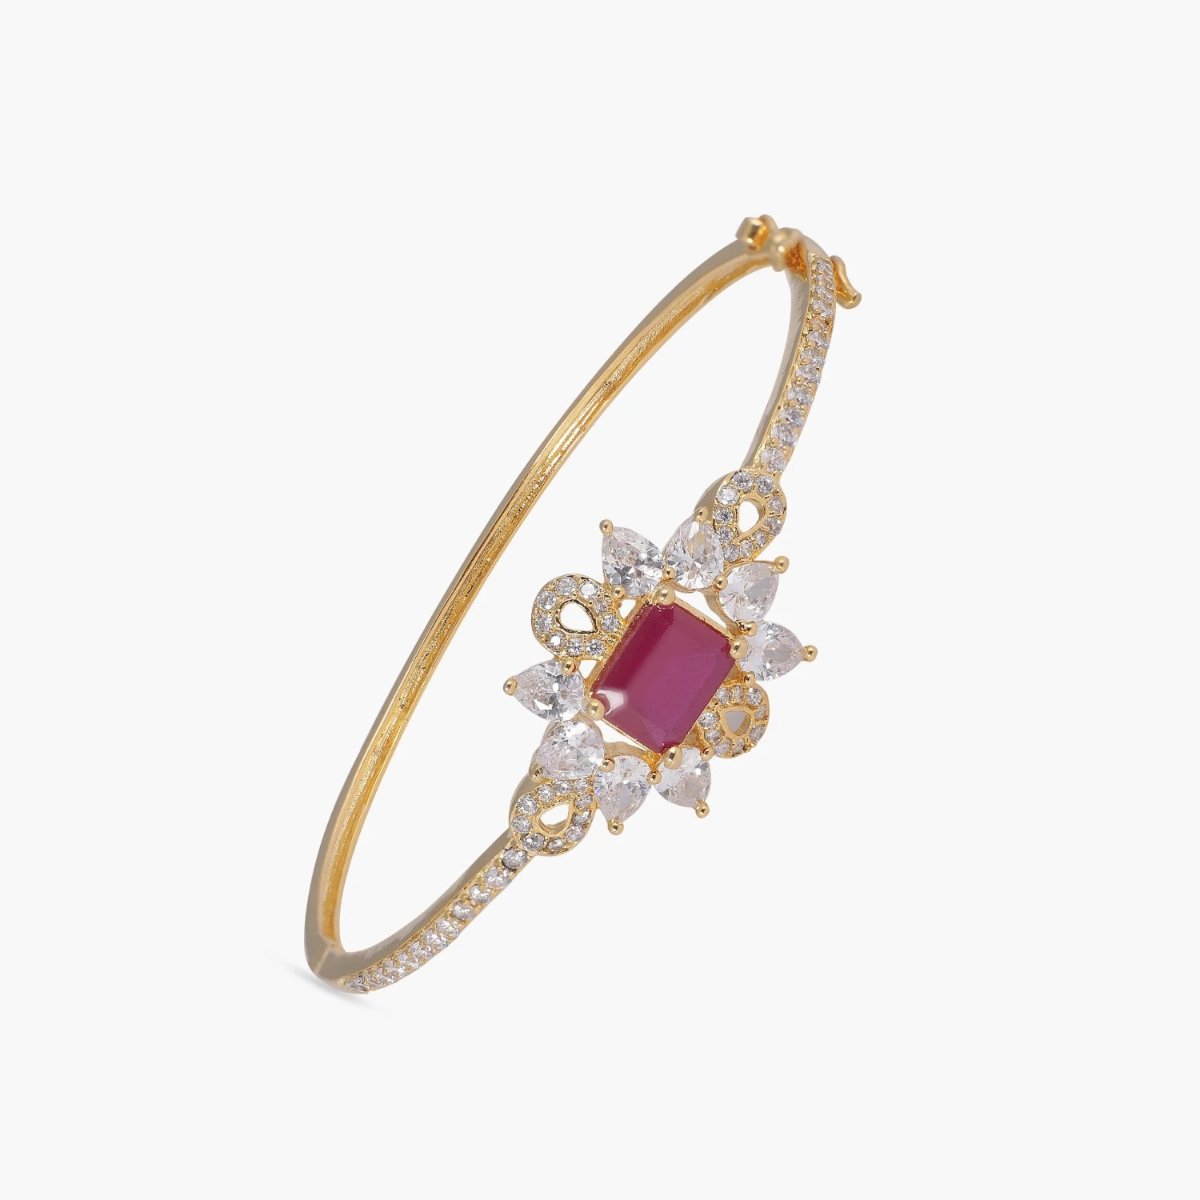 Artificial Set | Best website to buy jewelry - South India Jewels